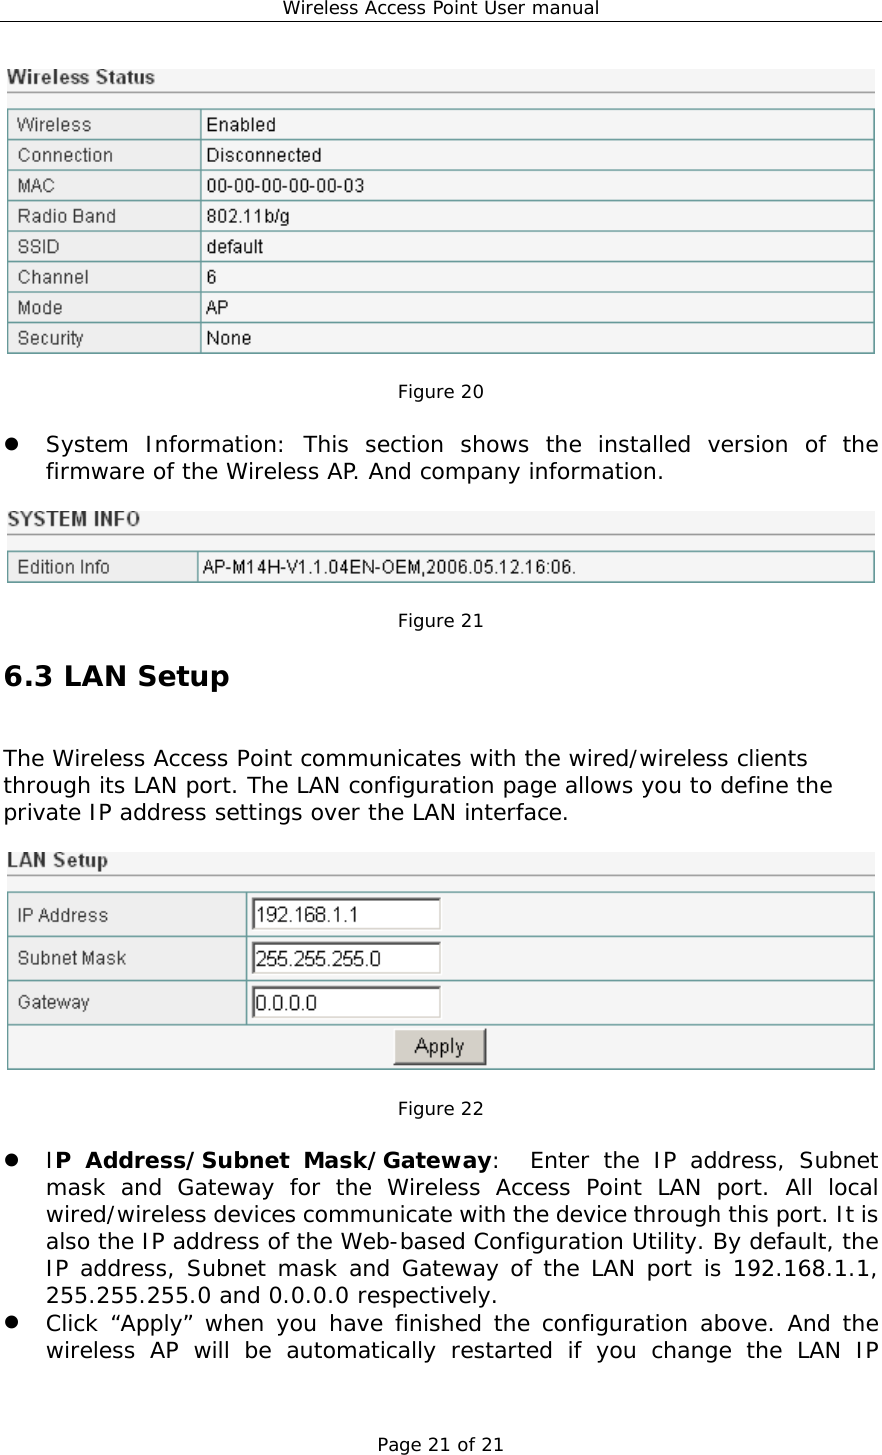 Wireless Access Point User manual Page 21 of 21   Figure 20    System Information: This section shows the installed version of the firmware of the Wireless AP. And company information.    Figure 21 6.3 LAN Setup The Wireless Access Point communicates with the wired/wireless clients through its LAN port. The LAN configuration page allows you to define the private IP address settings over the LAN interface.    Figure 22    IP Address/Subnet Mask/Gateway:  Enter the IP address, Subnet mask and Gateway for the Wireless Access Point LAN port. All local wired/wireless devices communicate with the device through this port. It is also the IP address of the Web-based Configuration Utility. By default, the IP address, Subnet mask and Gateway of the LAN port is 192.168.1.1, 255.255.255.0 and 0.0.0.0 respectively.    Click “Apply” when you have finished the configuration above. And the wireless AP will be automatically restarted if you change the LAN IP 